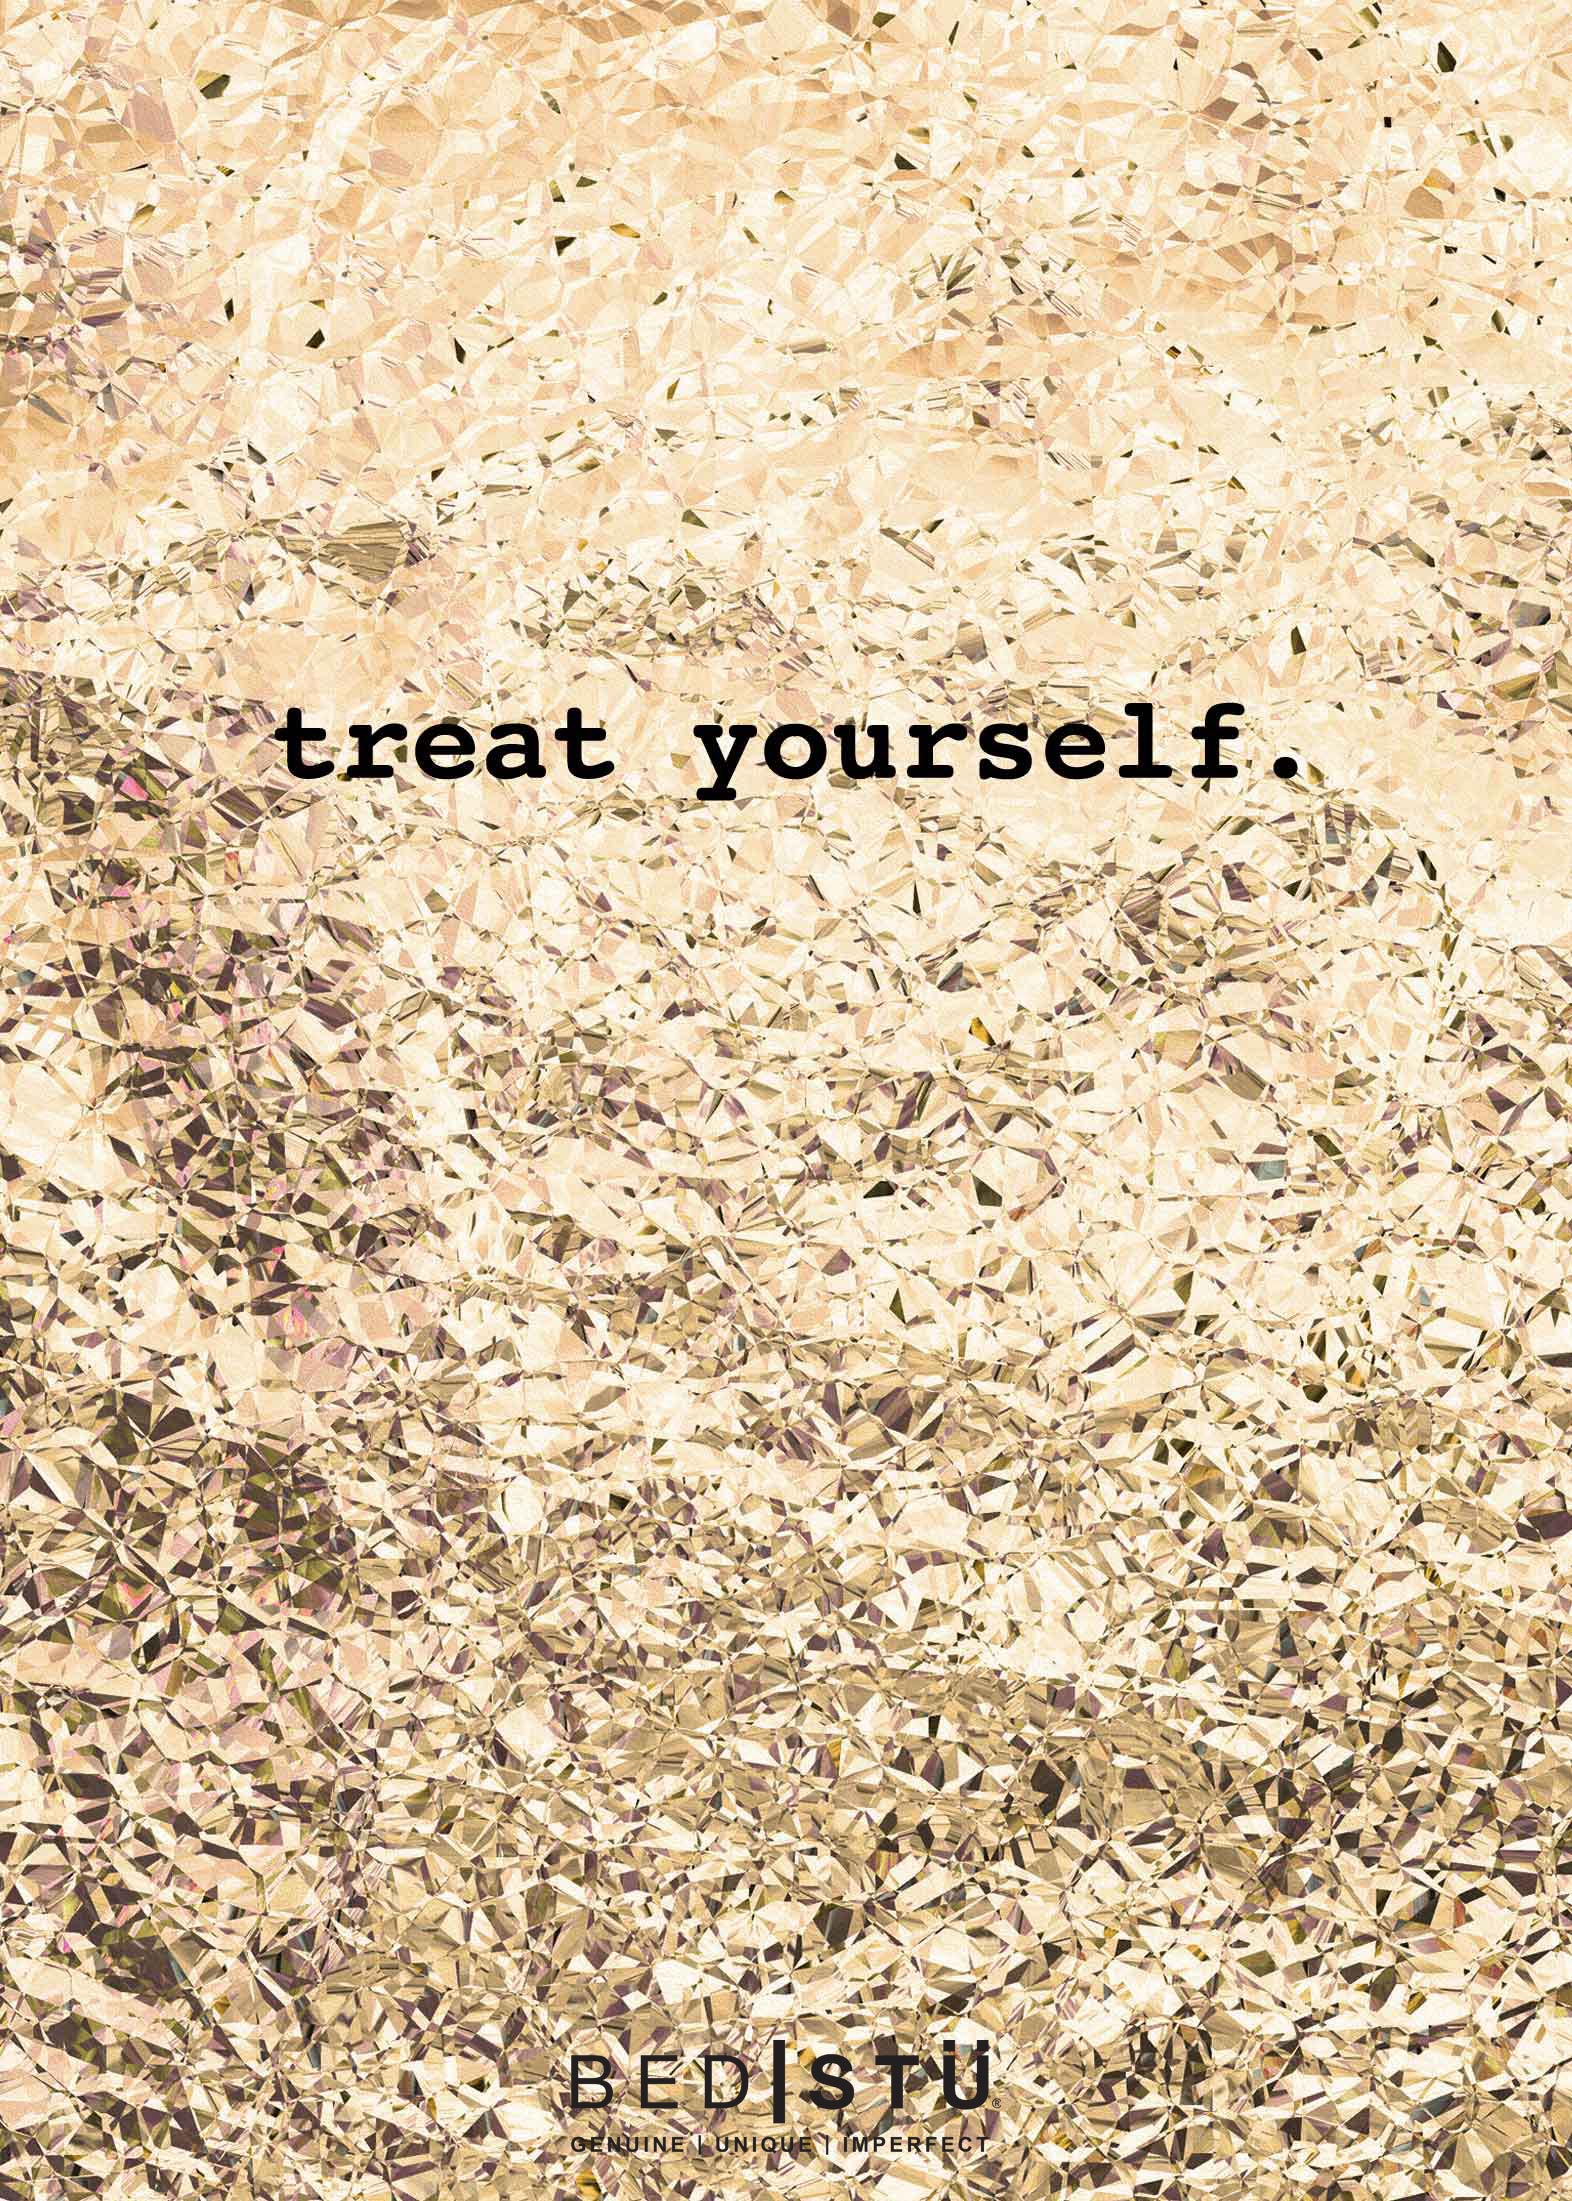 A gold foiled background with the words "Treat Yourself," available as an eGift card on Bed|Stü.com.